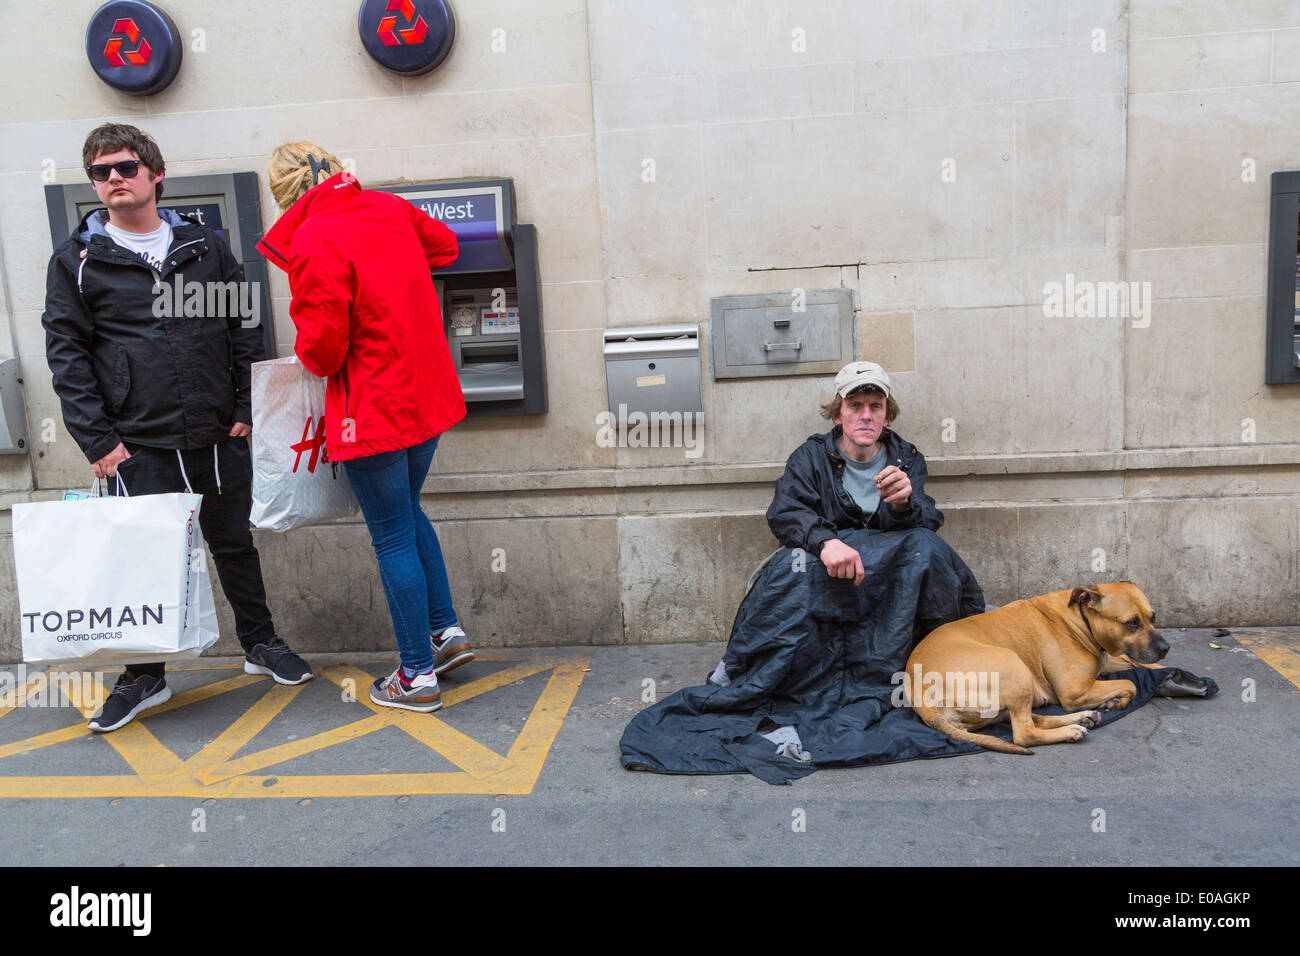 Young millennials withdraw cash from an ATM whilst a homeless man and his dog sit nearby begging for money, London England UK Stock Photo